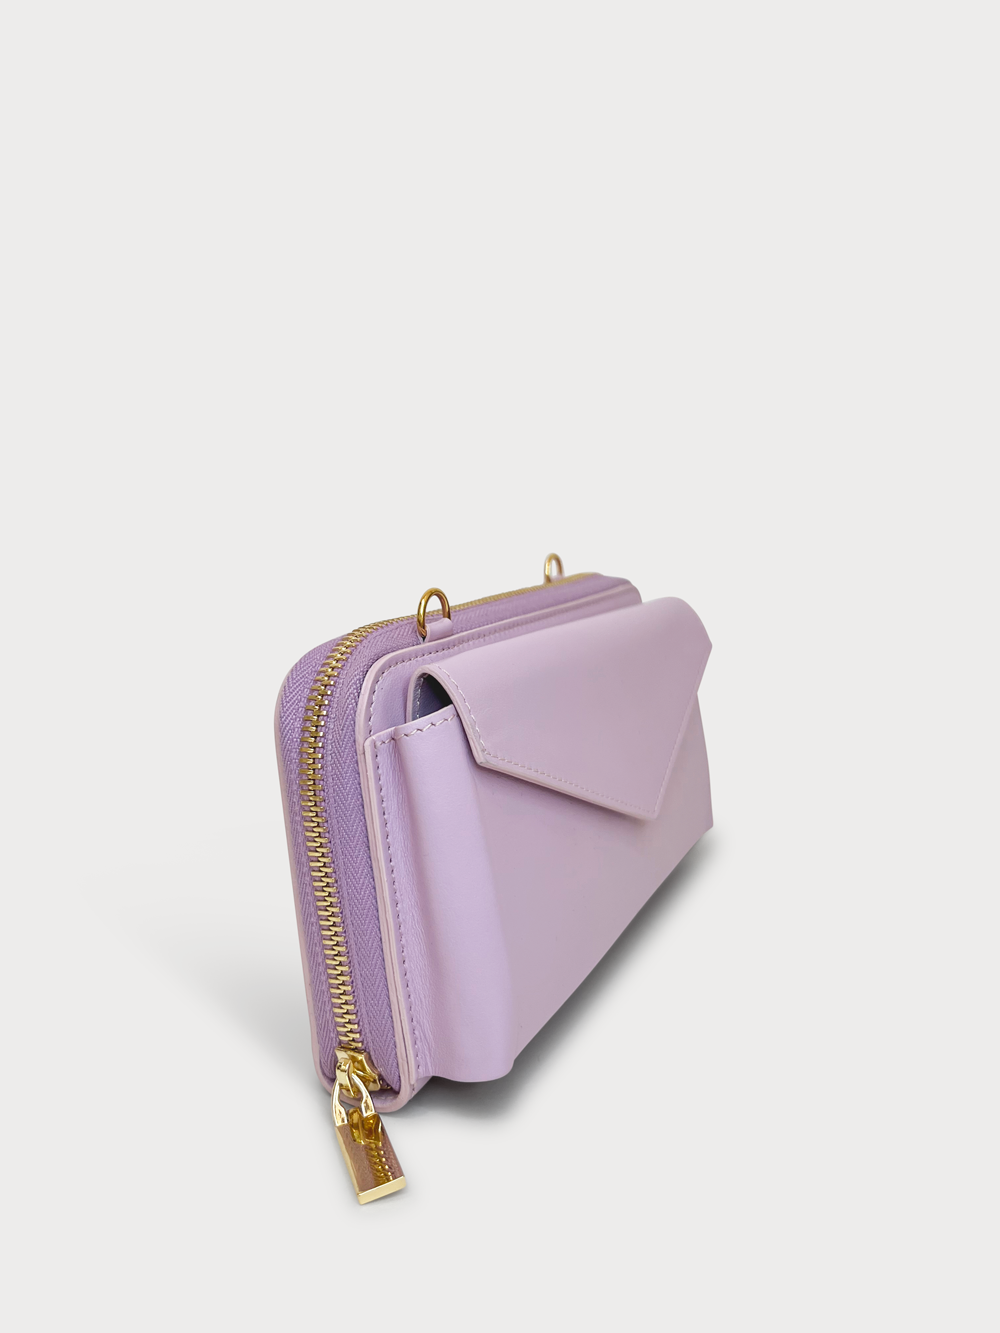 Mel Boteri | 'Himani' Wallet Clutch Bag With Detachable Cross-Body Strap | lilla leather | side view